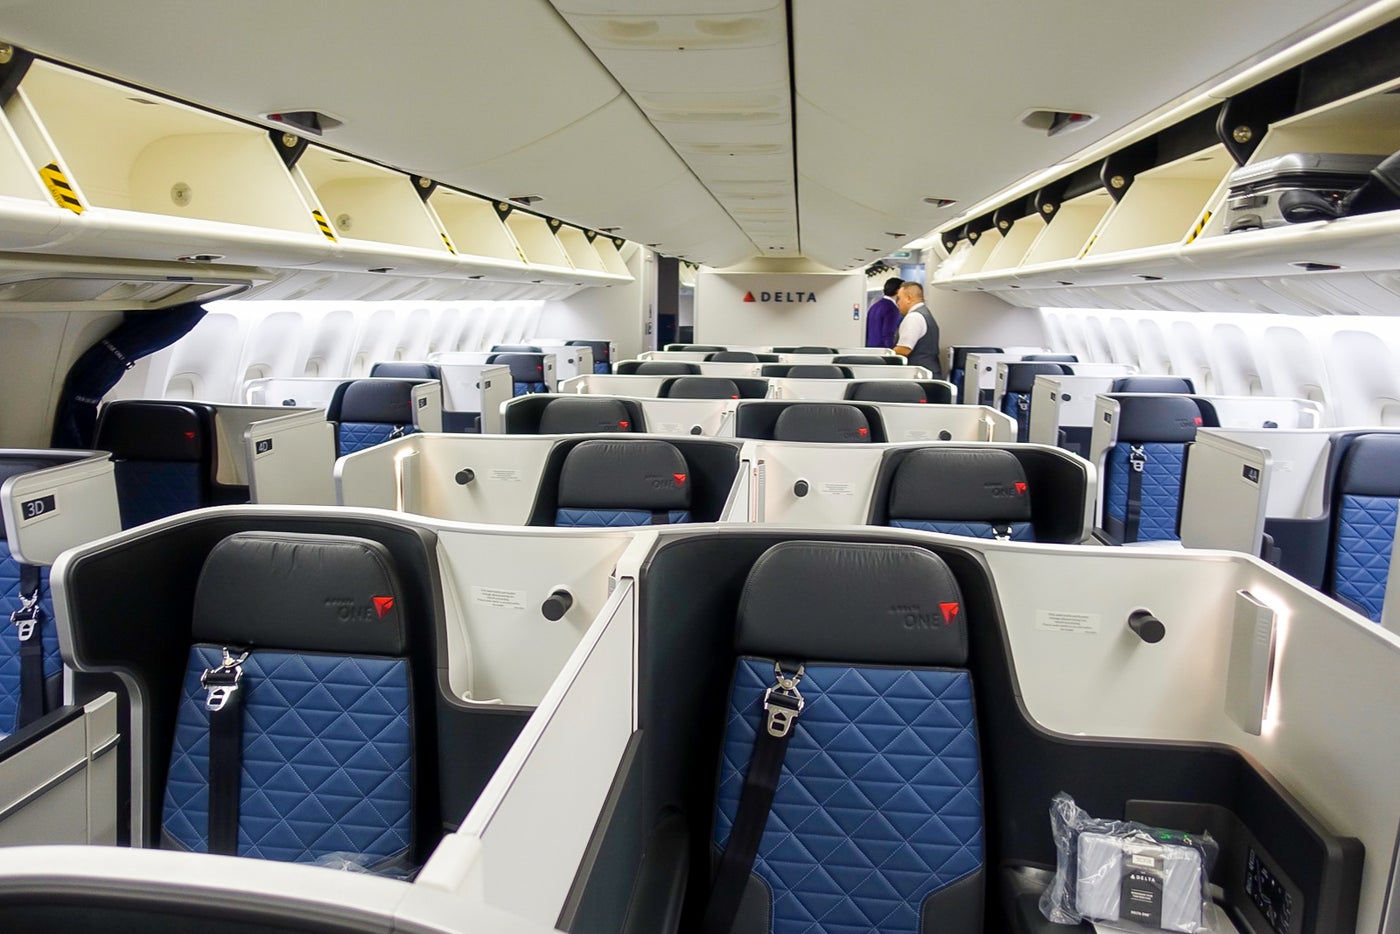 Aboard Delta's First Retrofitted 767400ER With BrandNew Delta One Seats